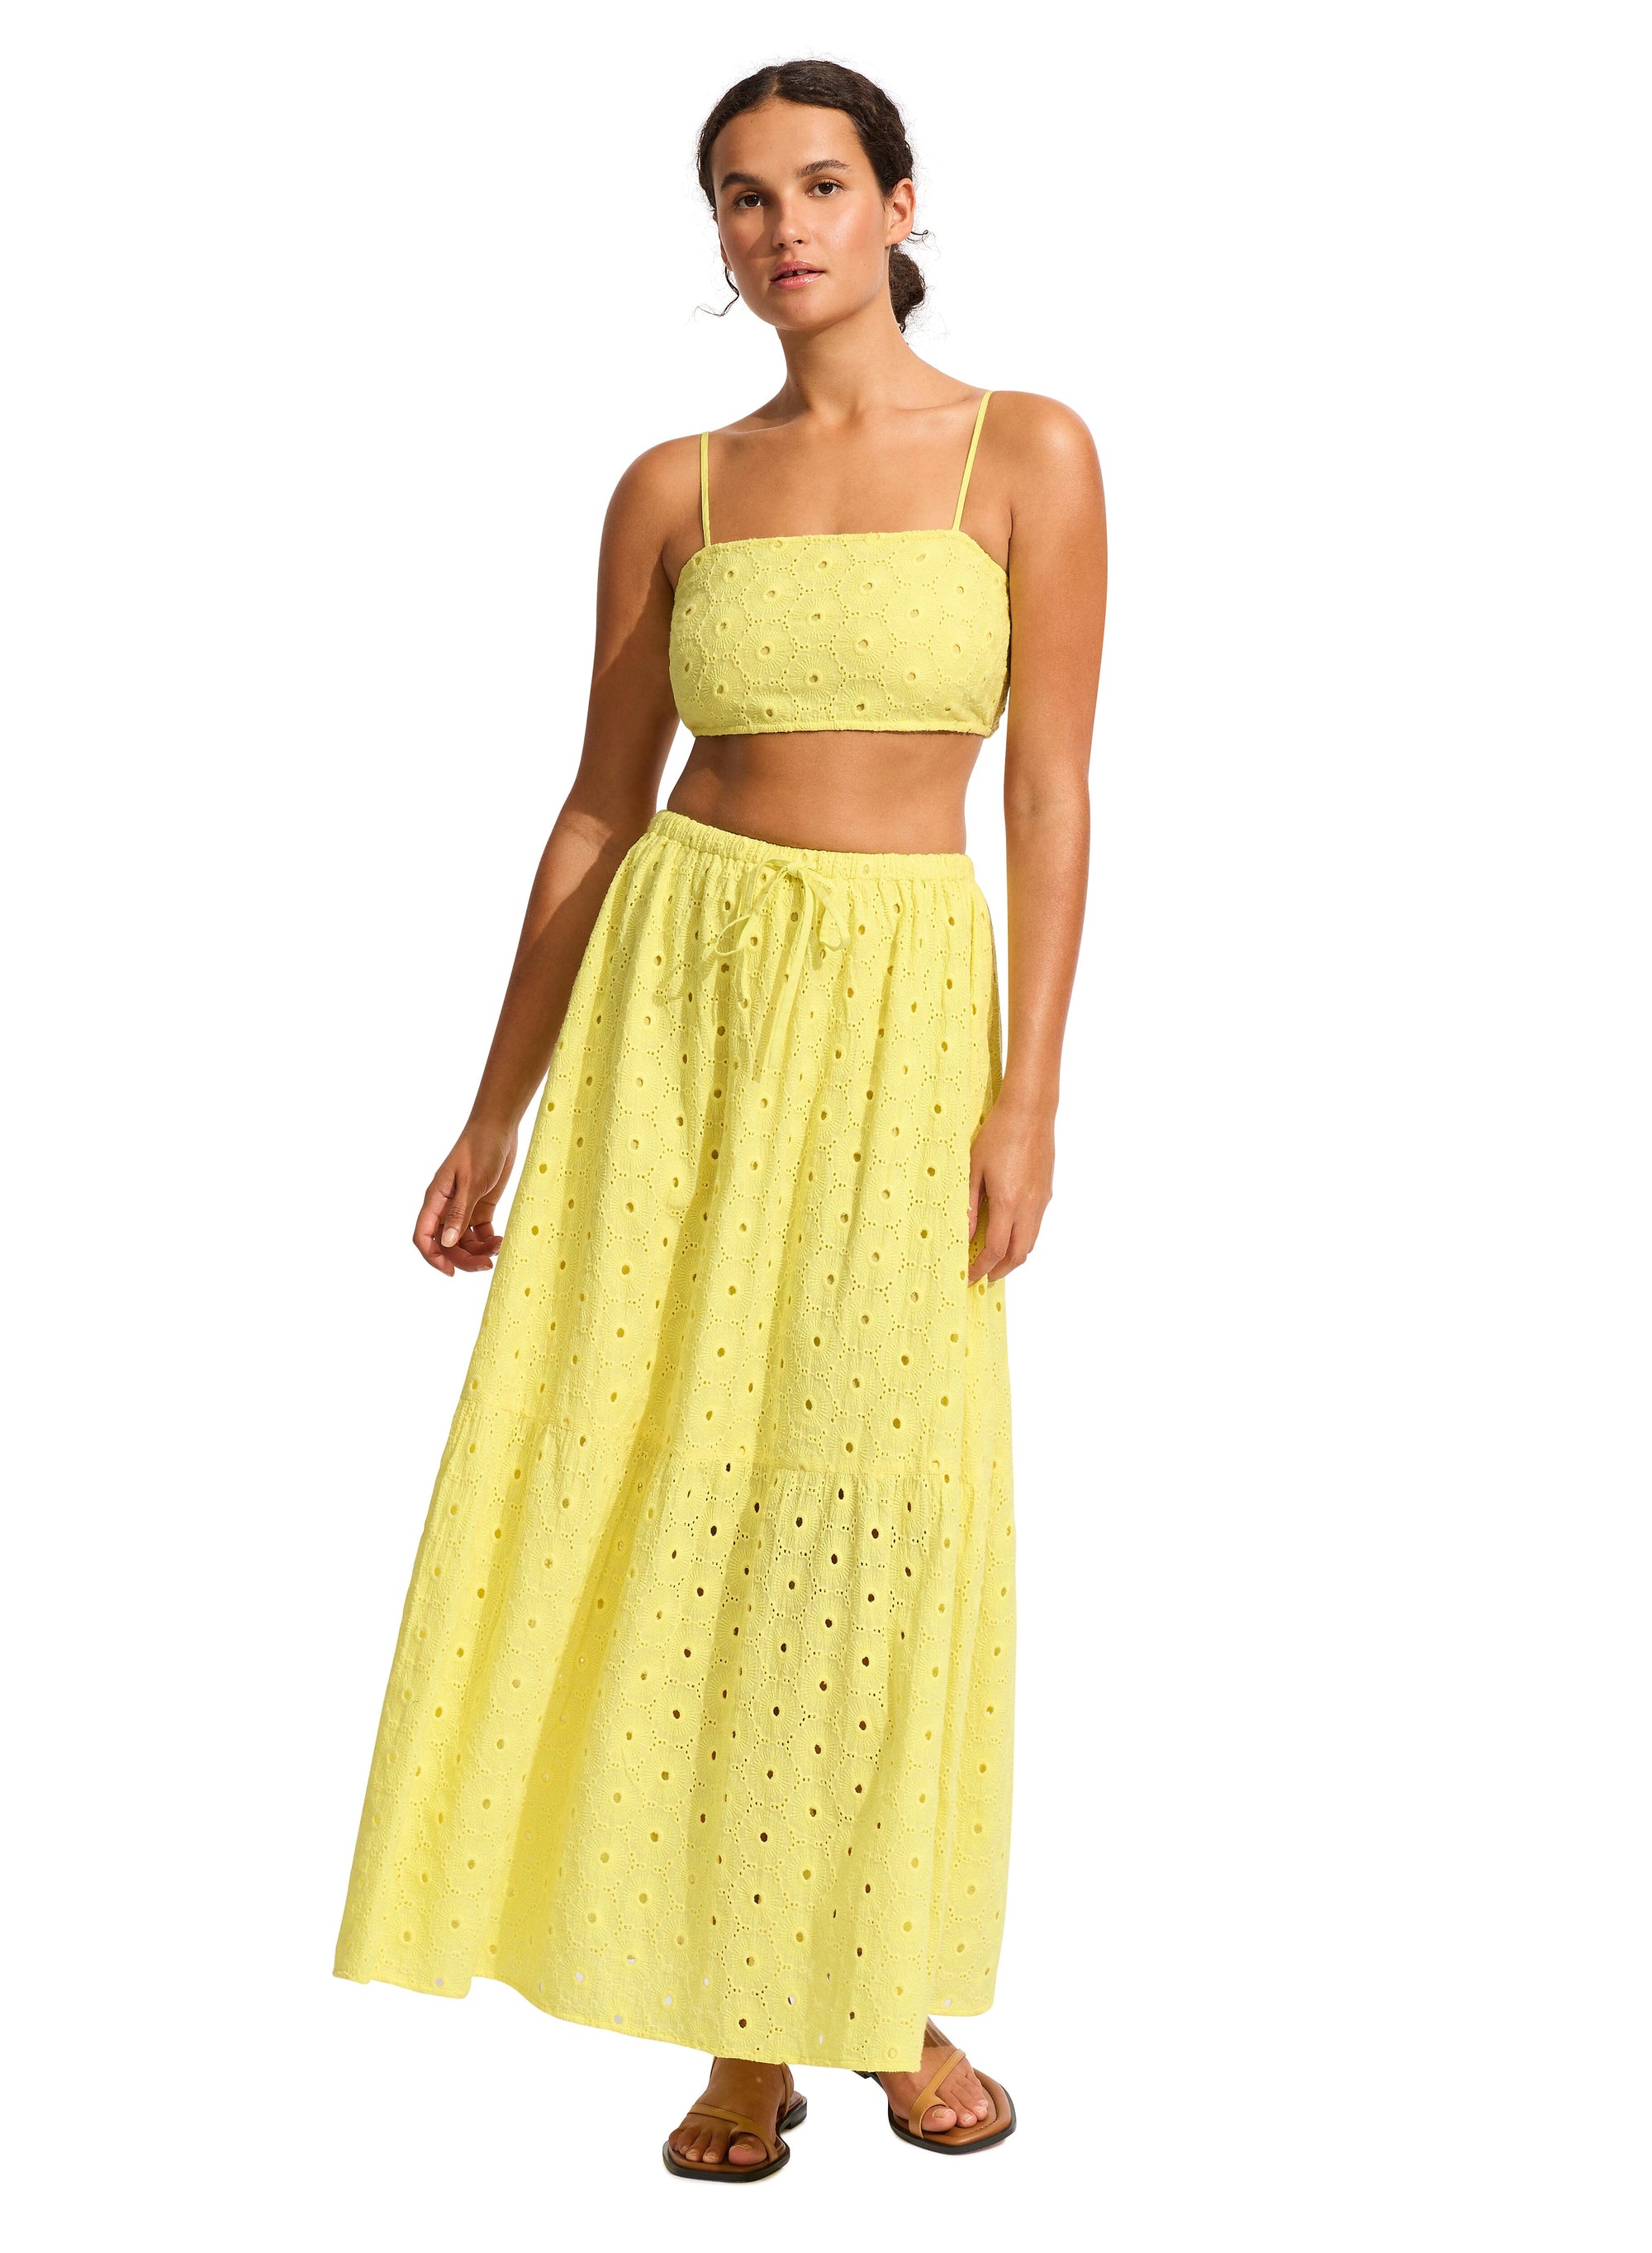 Broderie Maxi Skirt CLOTHING SEAFOLLY 